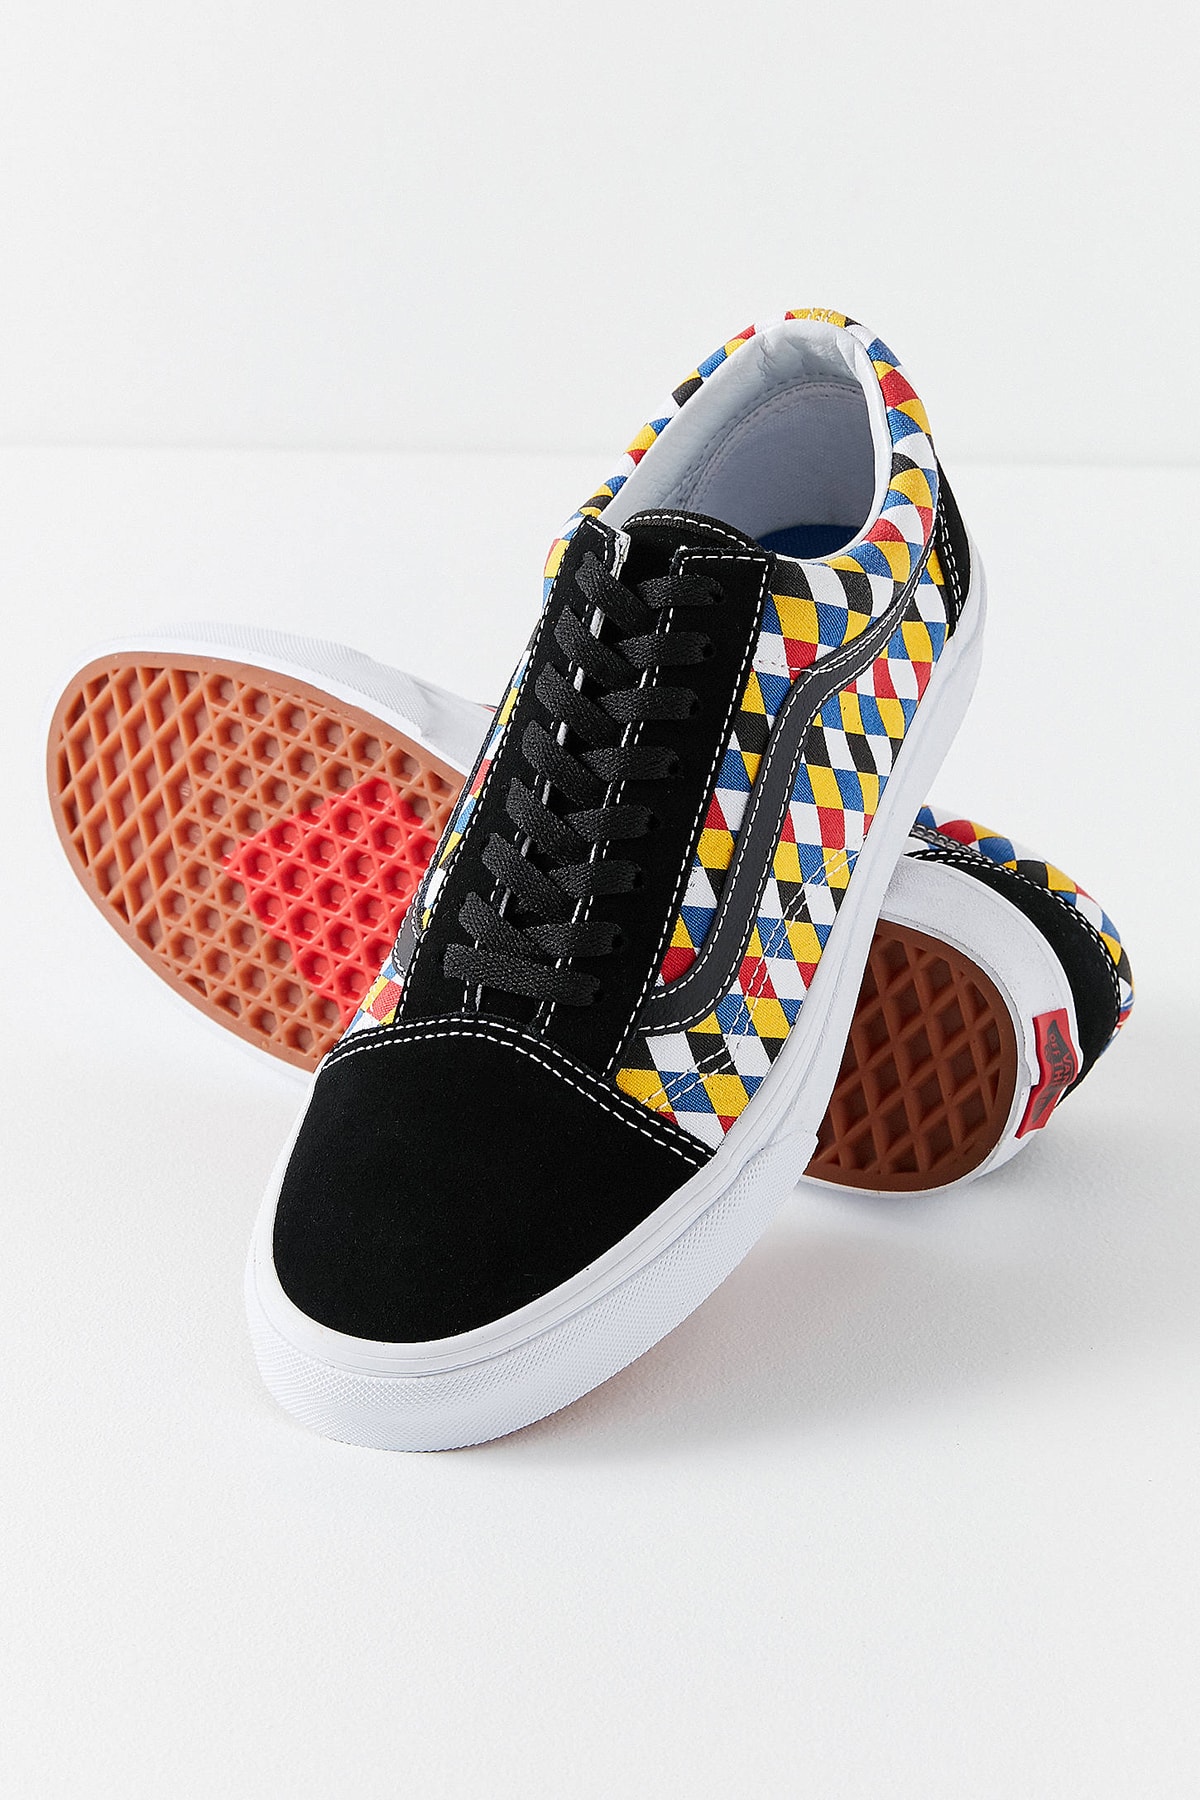 Vans Urban Outfitters Old Skool Diamonds Playing Cards Black Red Yellow Blue